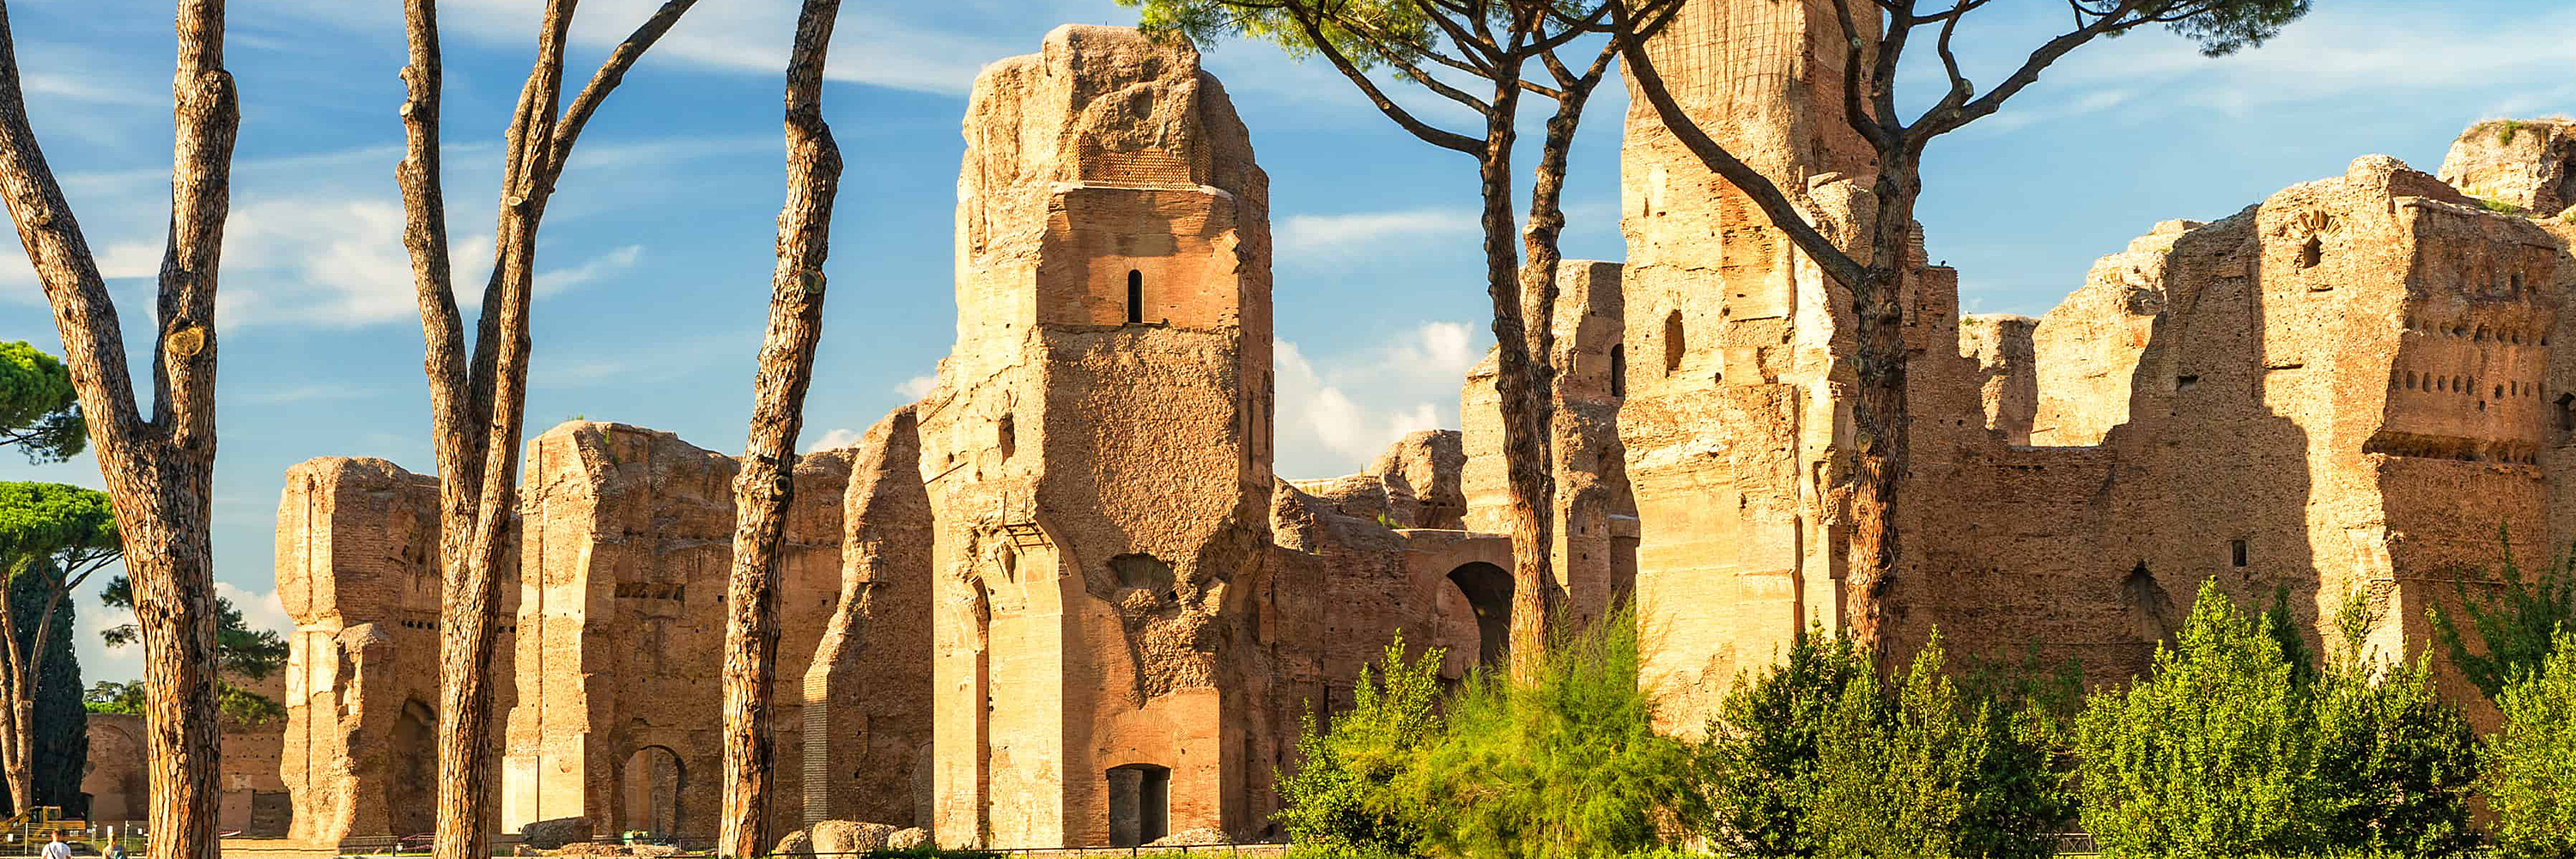 Caracalla Therme, Rom